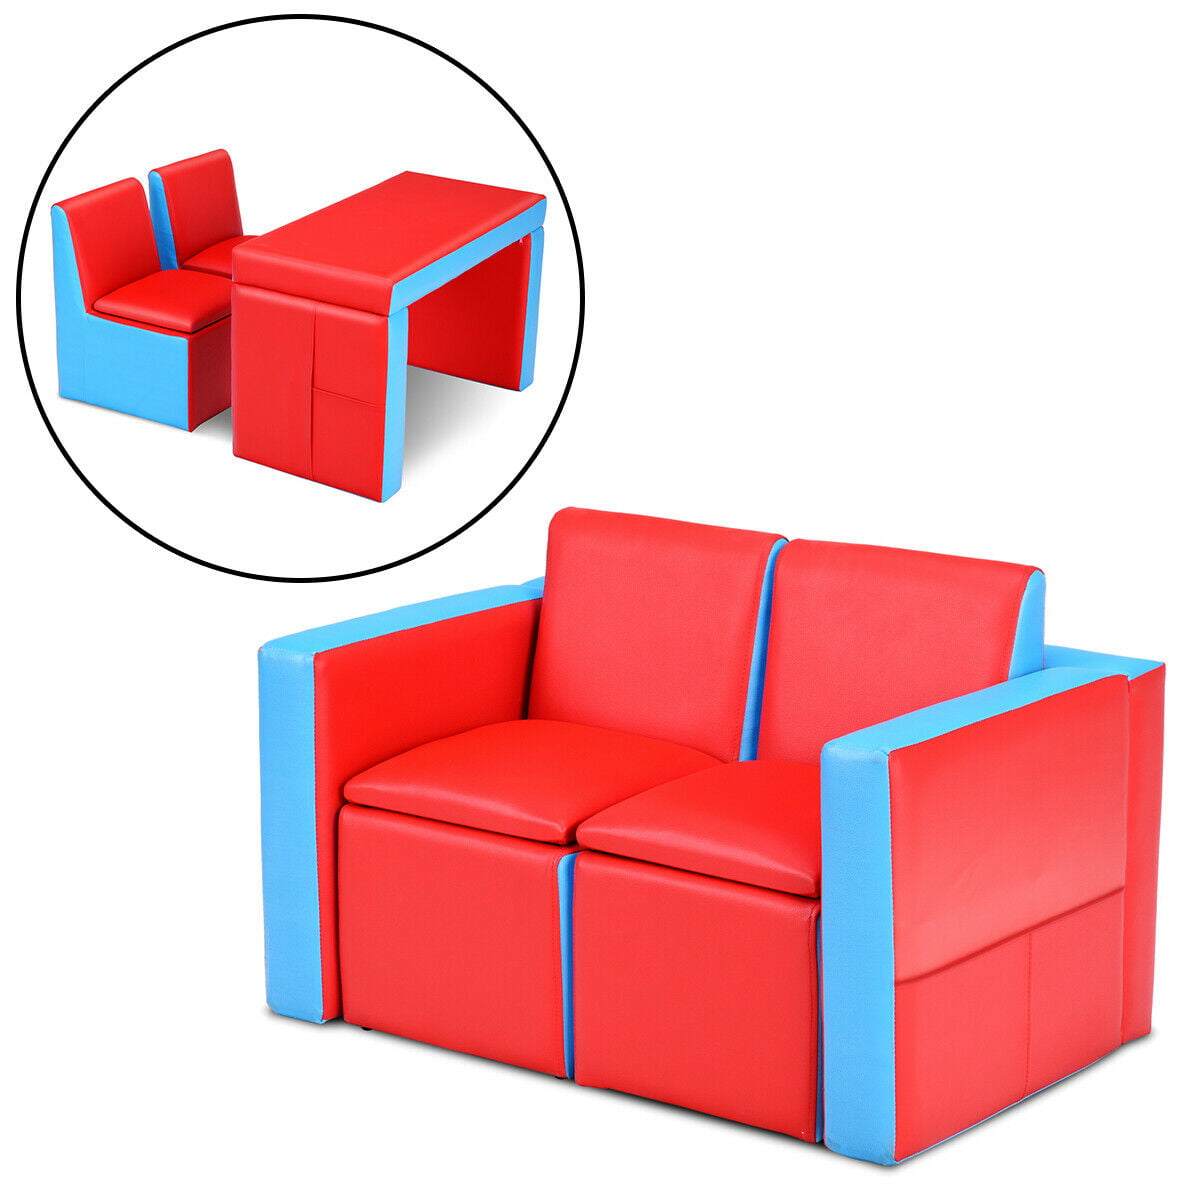 Multifunctional Children's Table Chair Set for Kids Room Playroom Blue Kids Double Seat Sofa 2 in 1 PVC Leather Toddler 2-Seater Couch Armchair with Heart Shape Back for Boys and Girls 